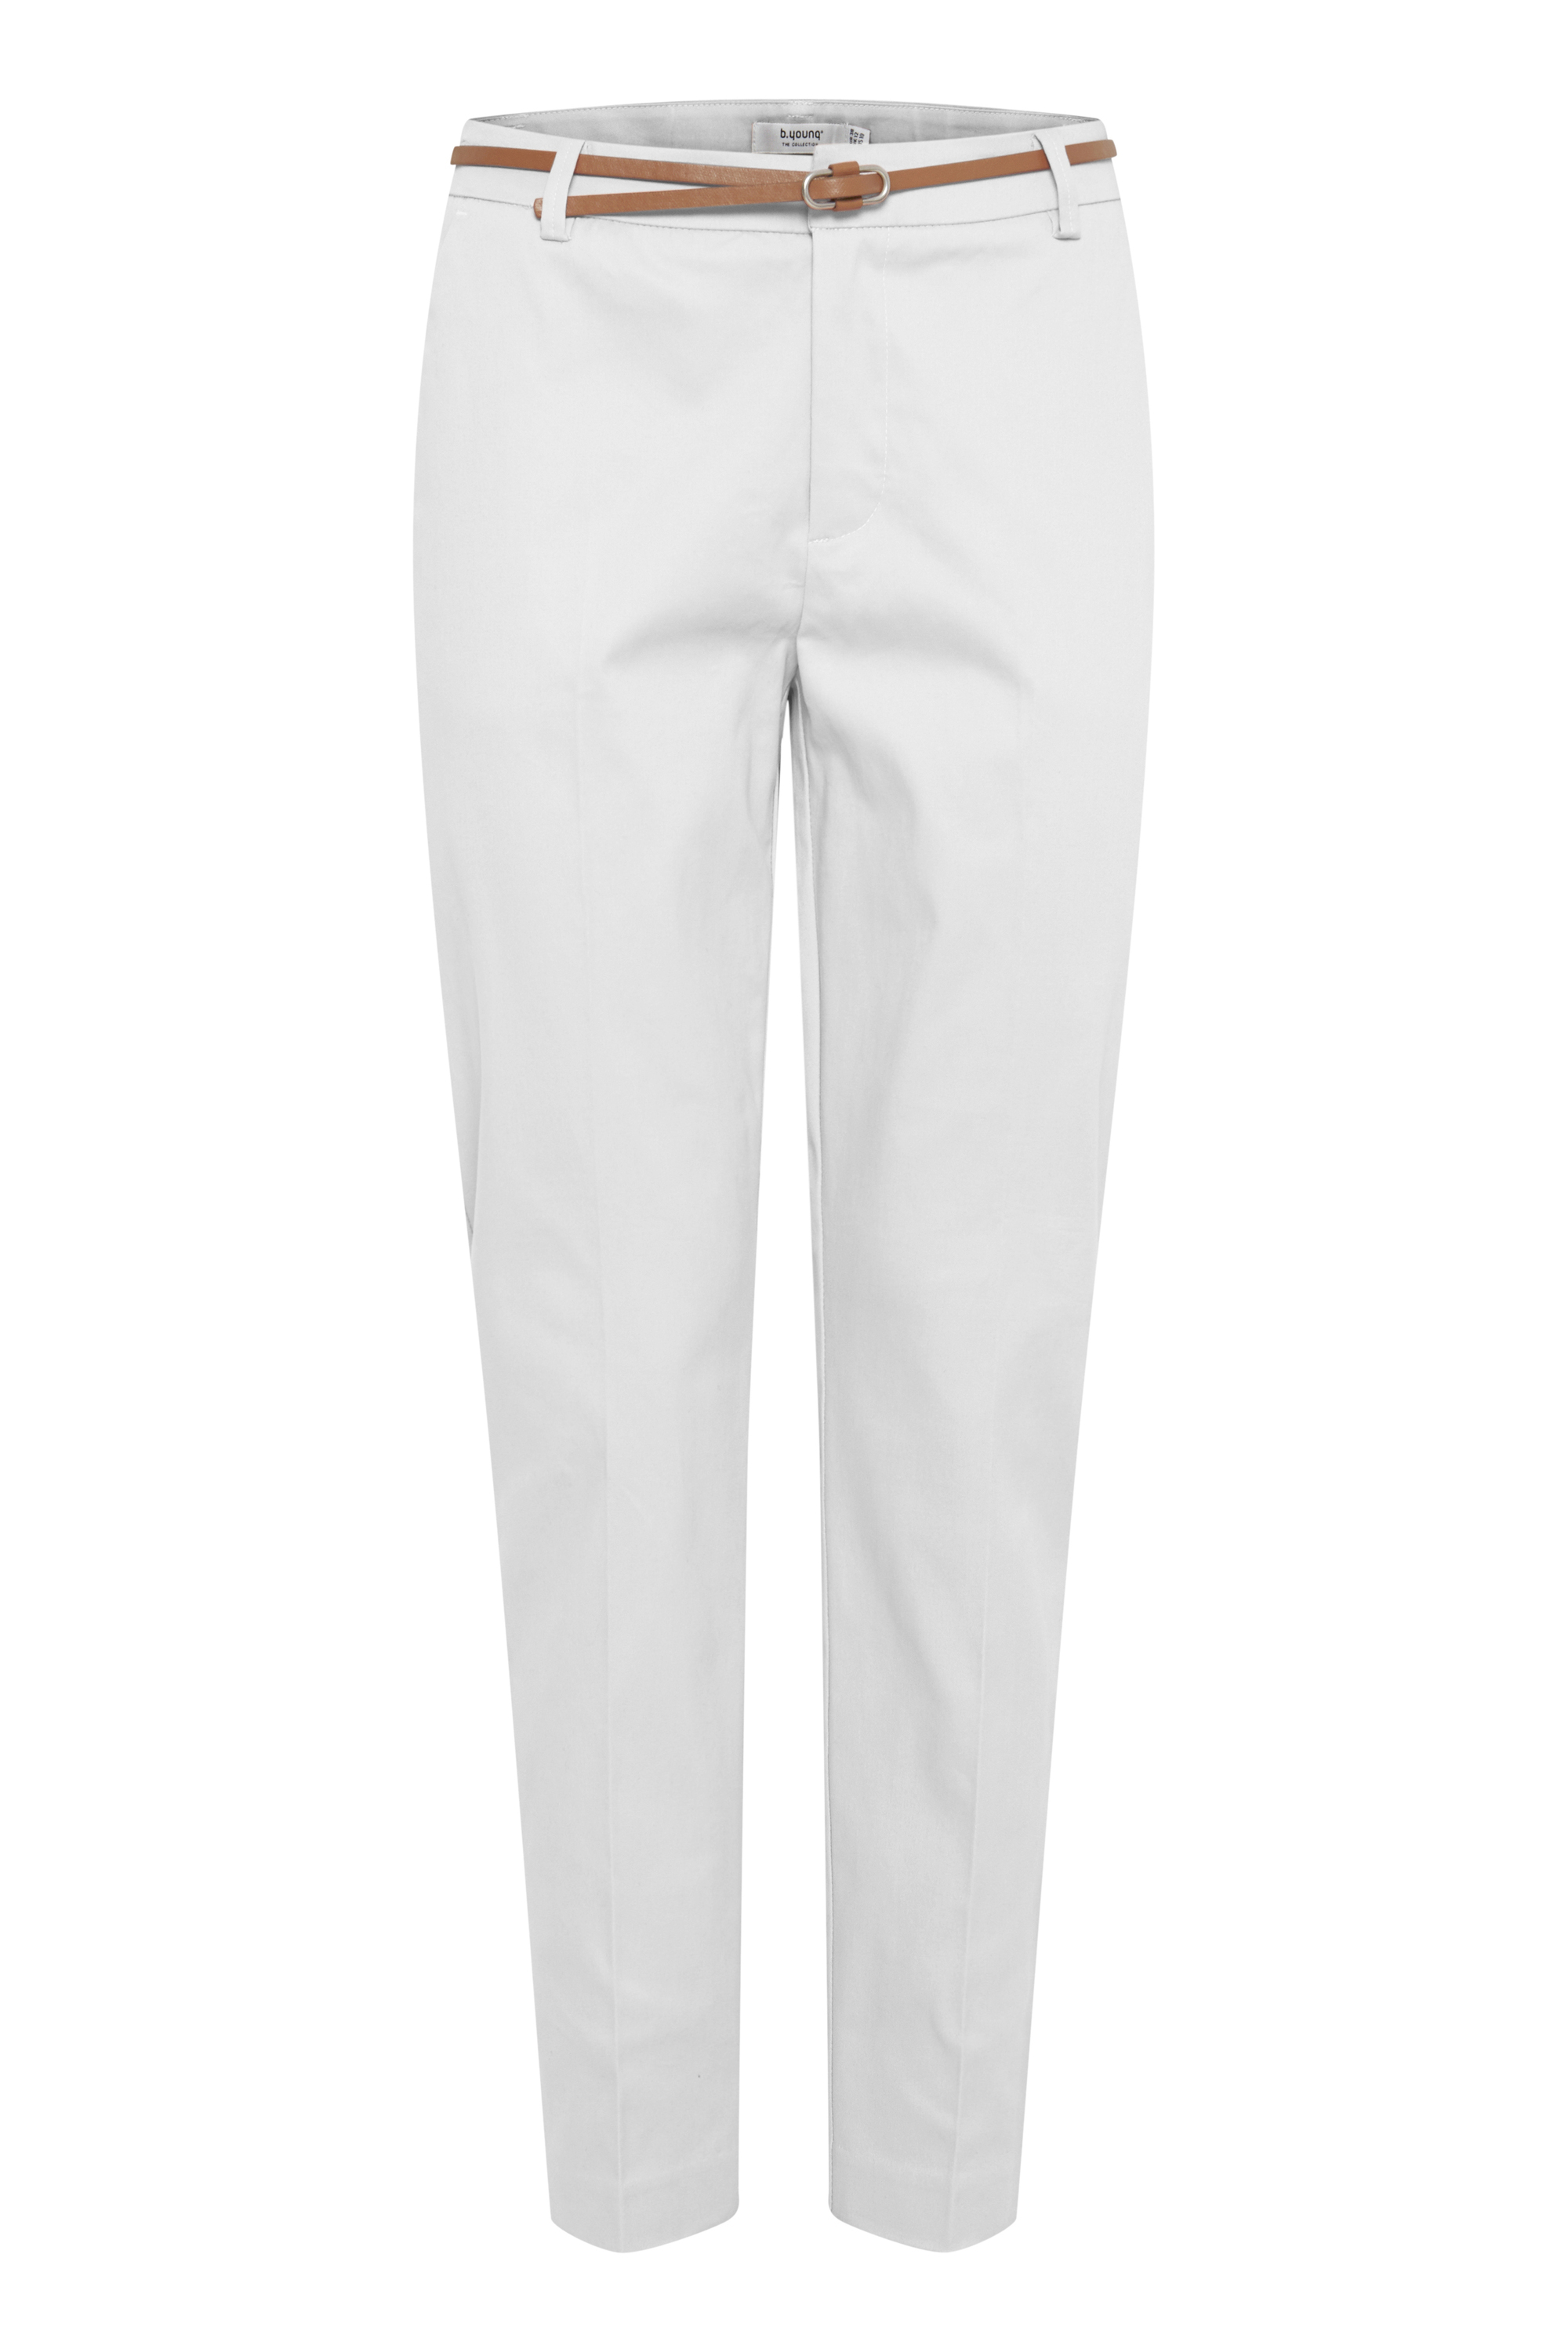 Taglie comode Donna b.young Pantaloni chino in Offwhite 